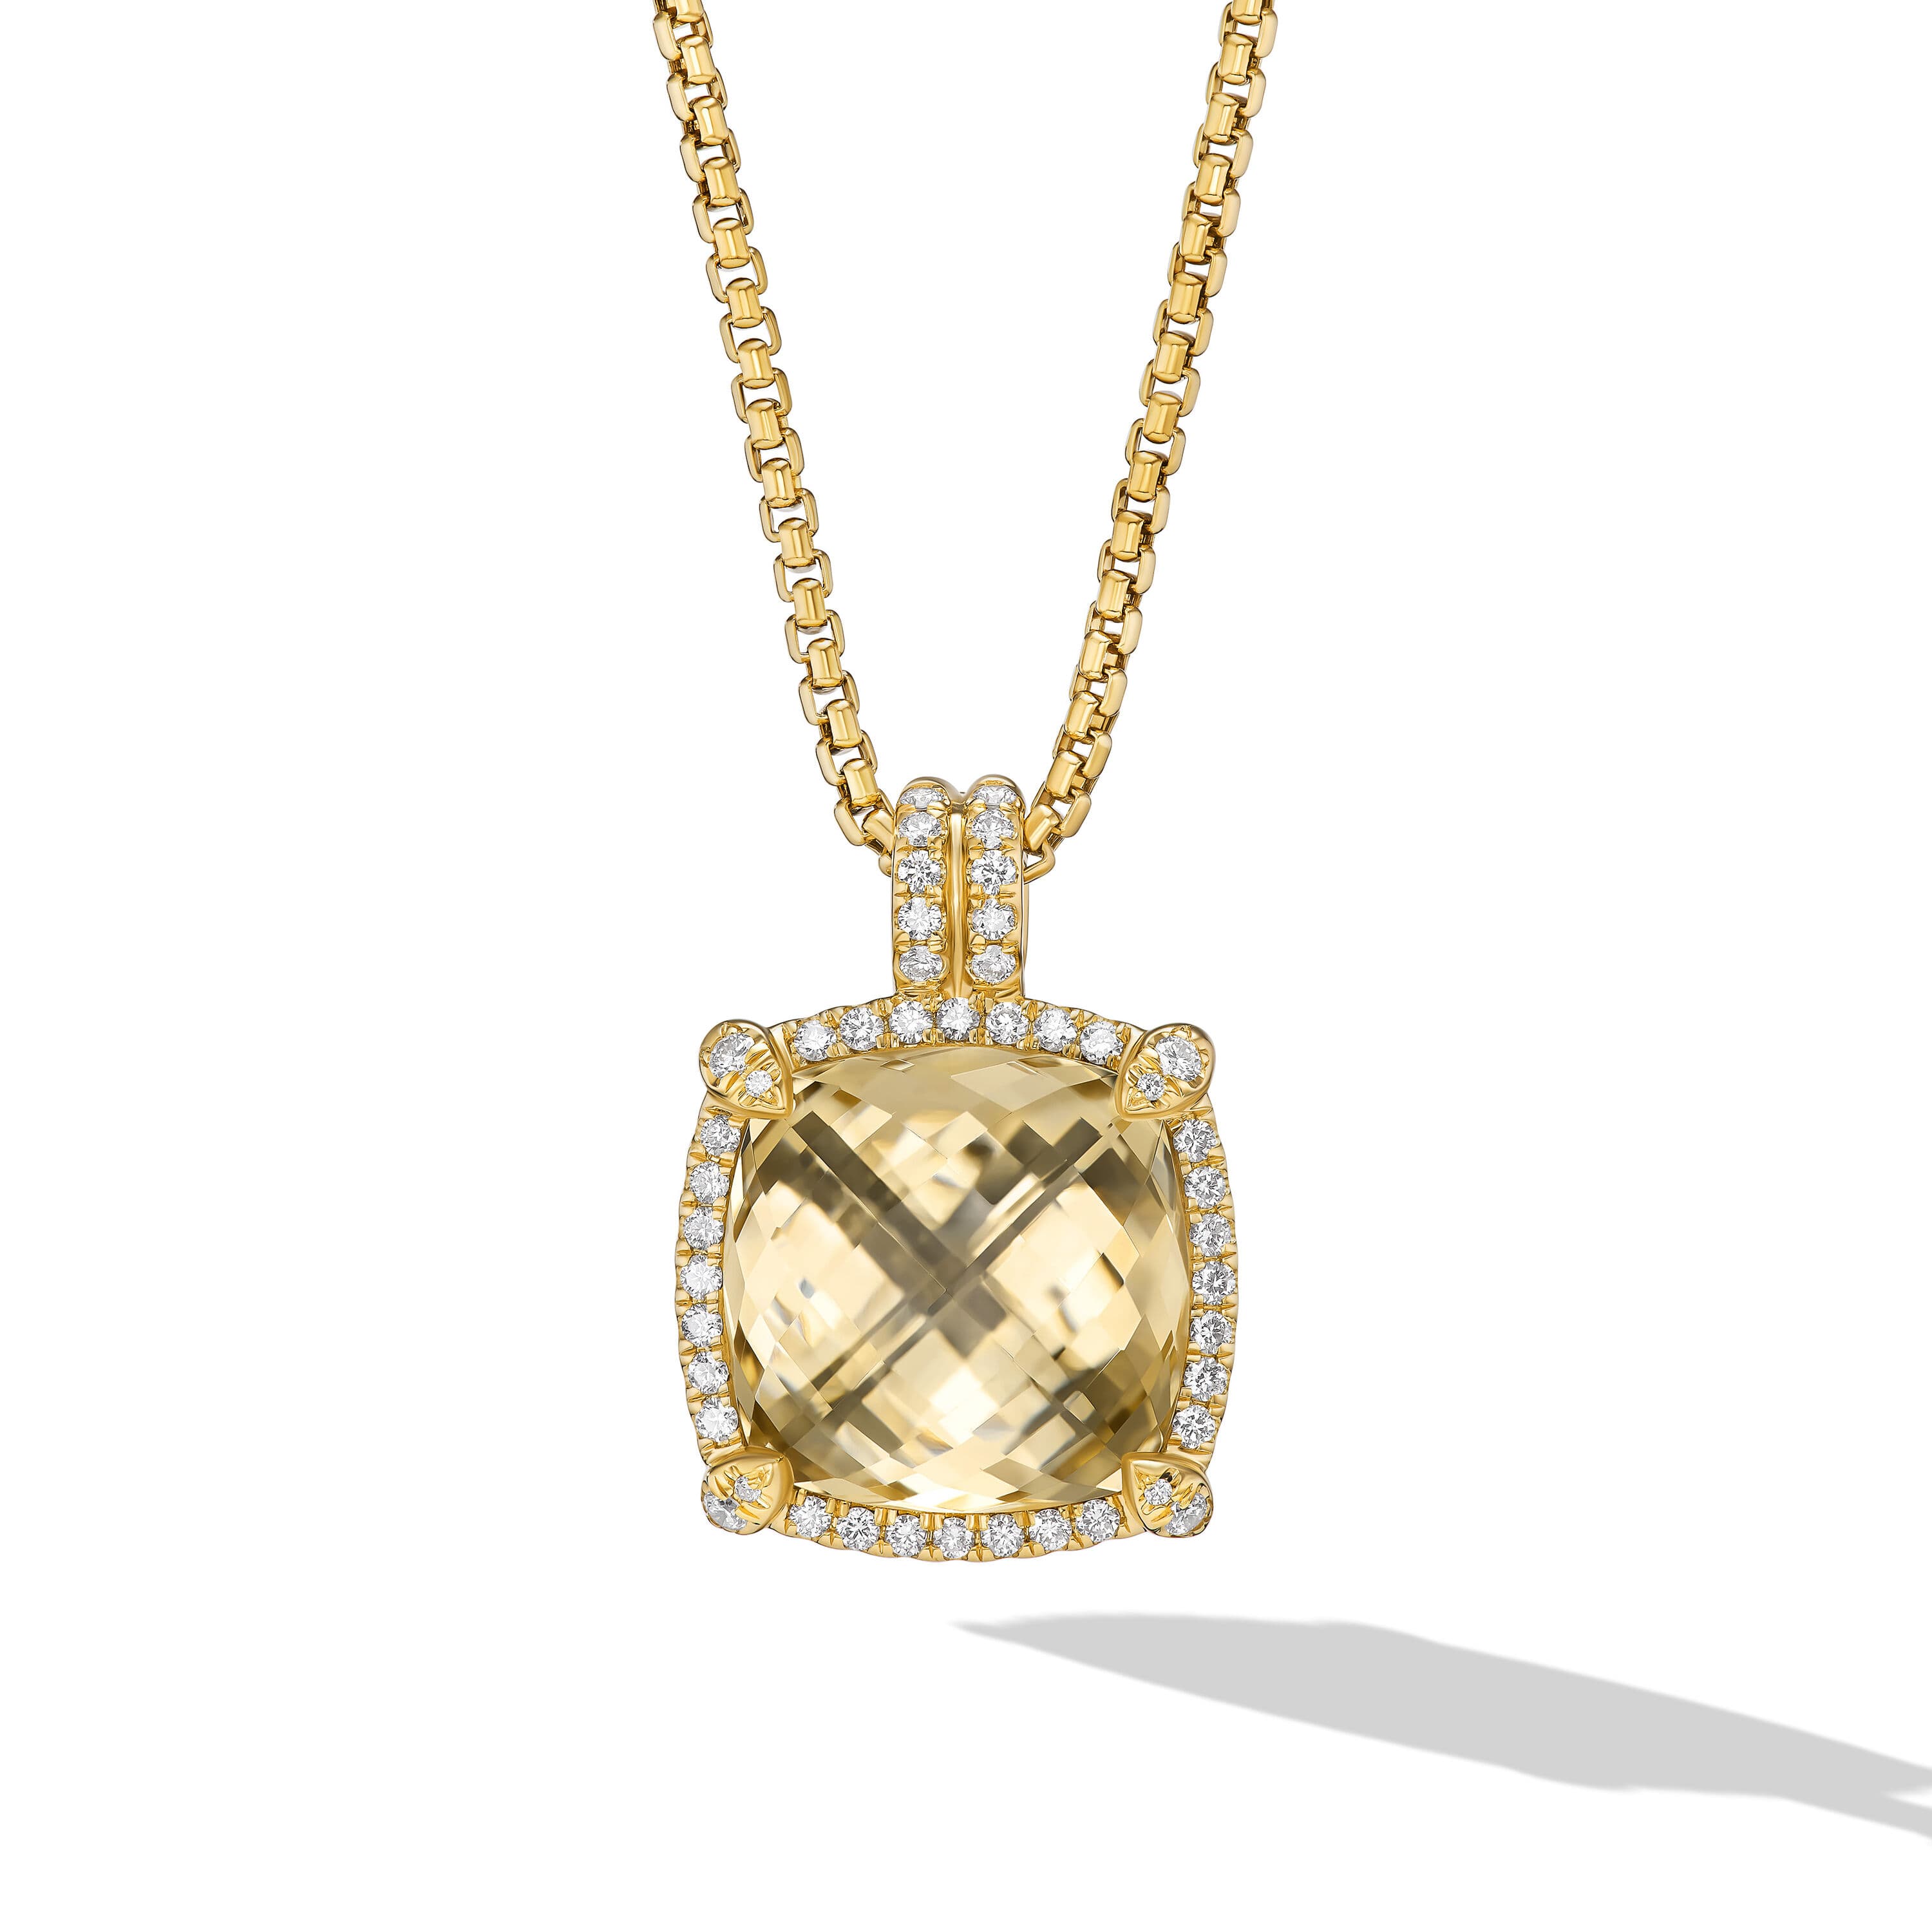 David Yurman Chatelaine Pave Bezel Pendant Necklace in Gold with Champagne Citrine and Diamonds